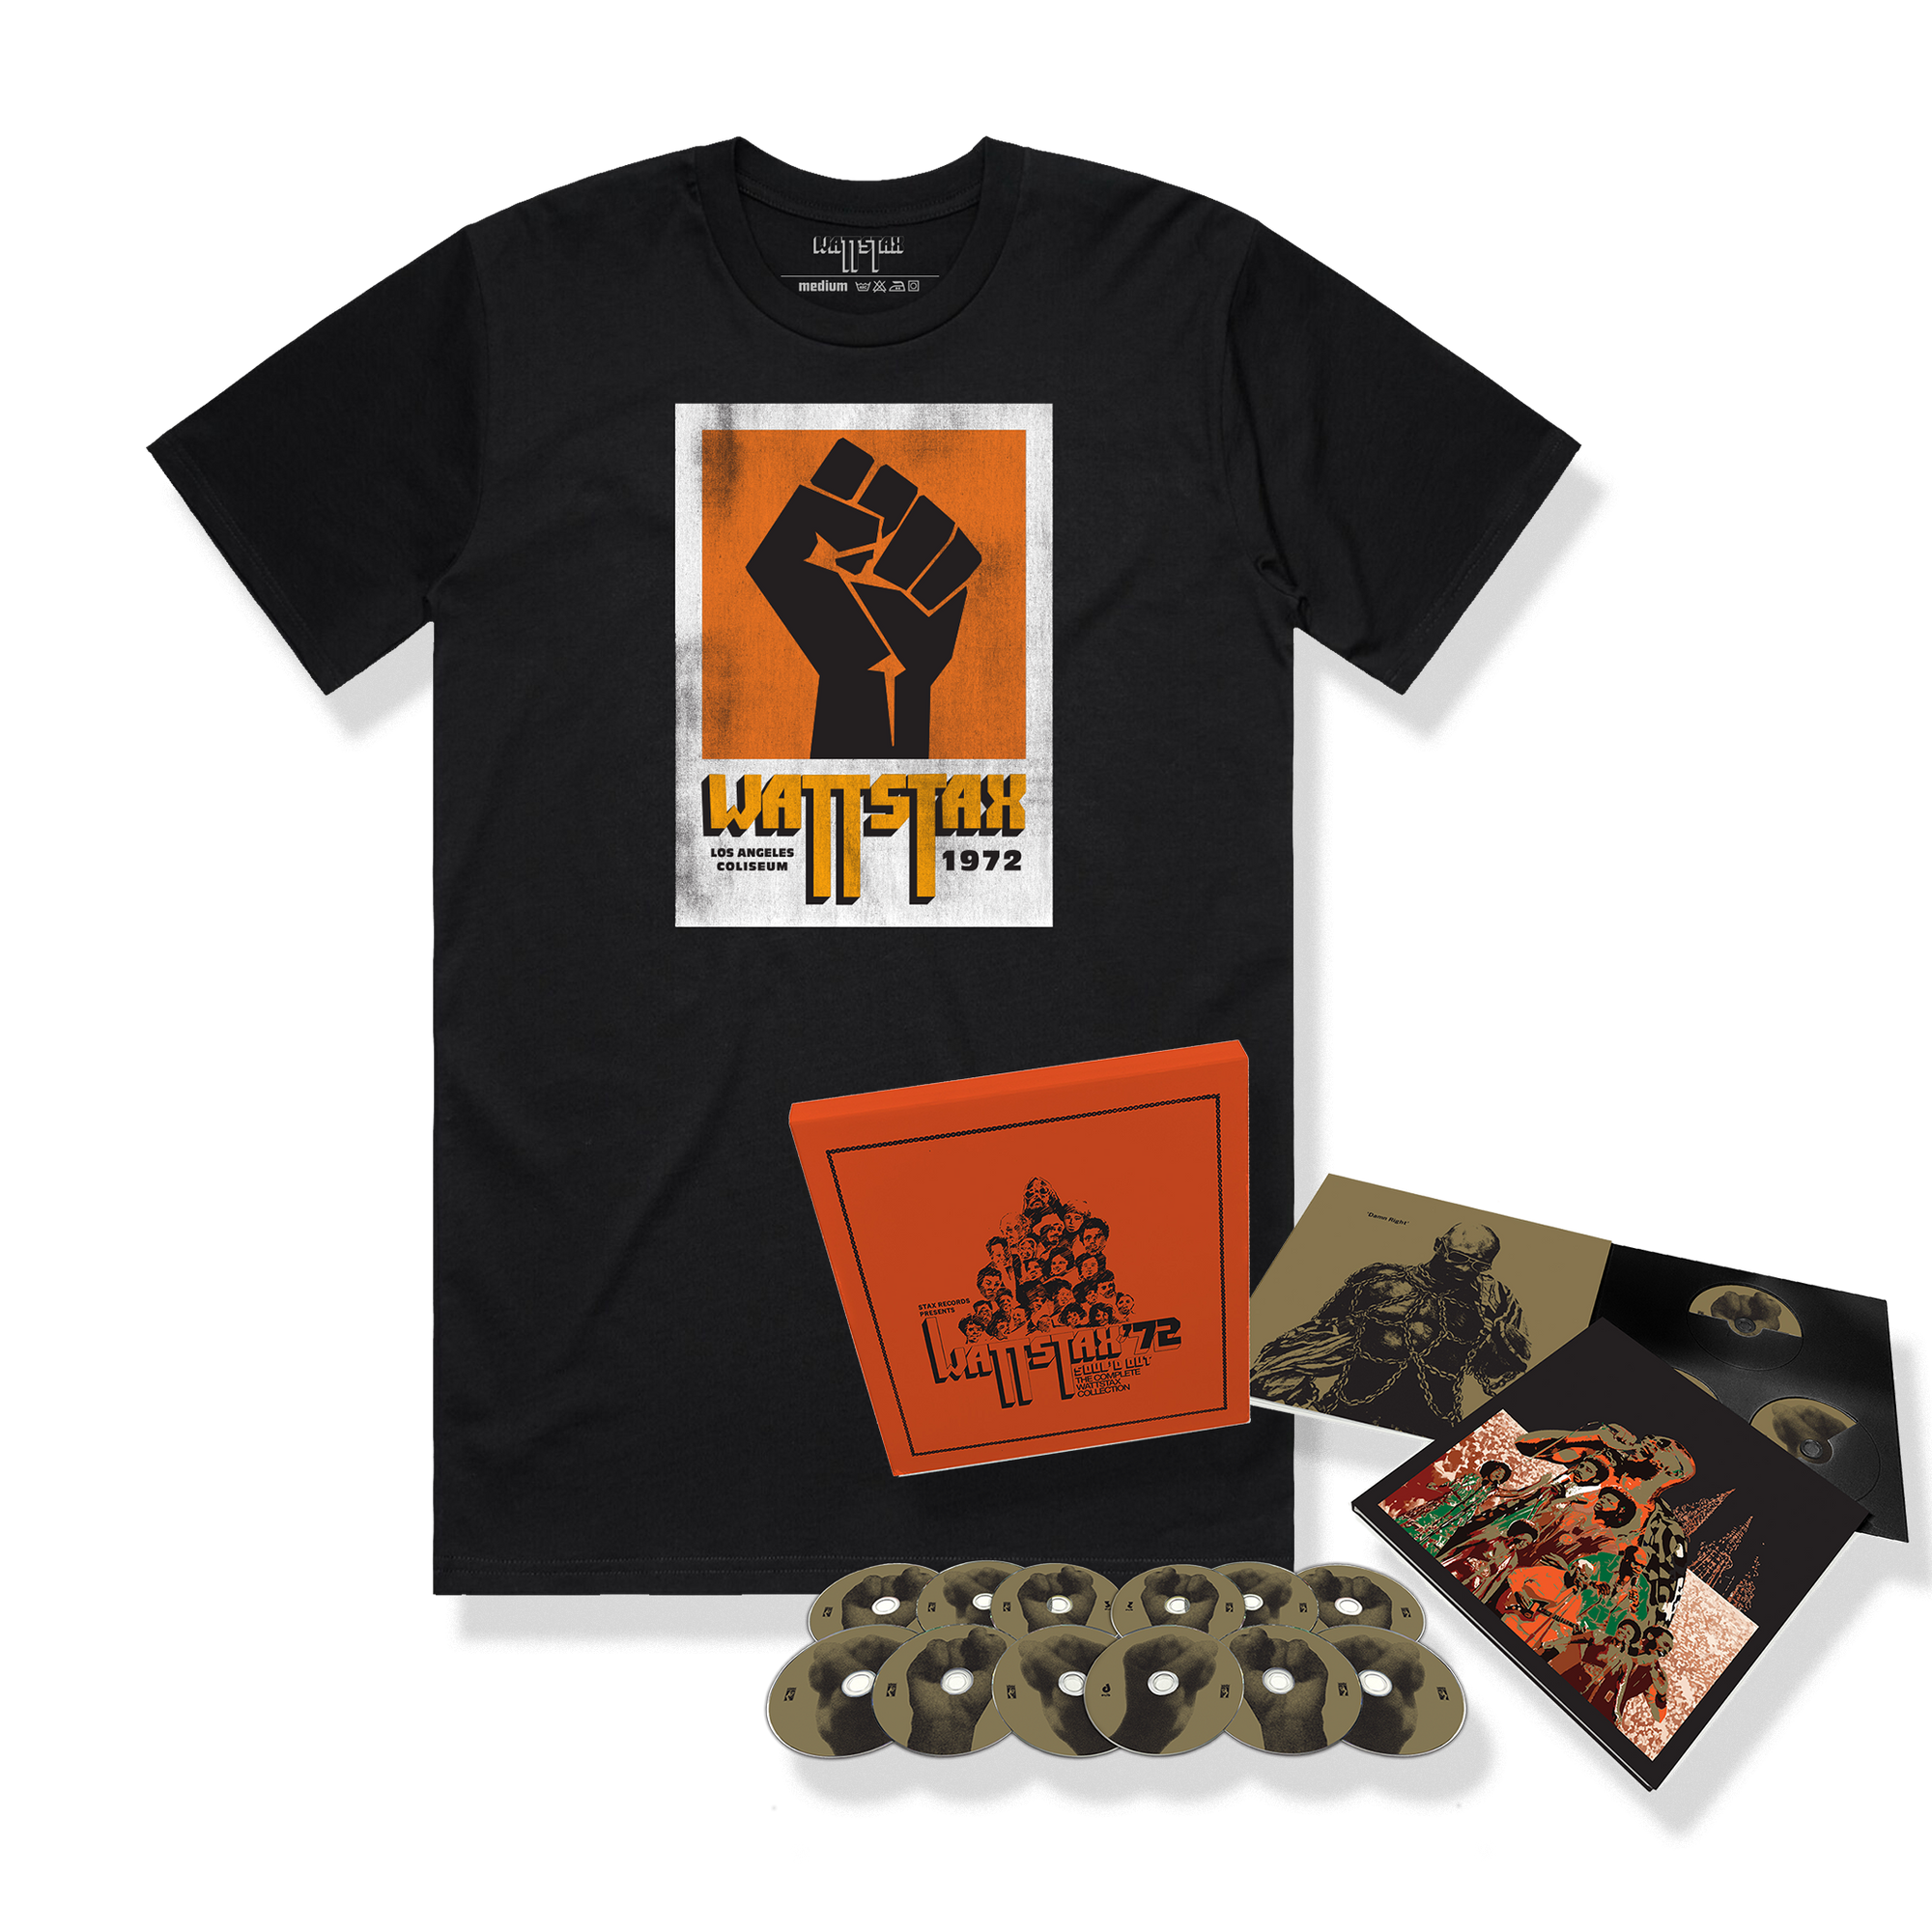 Soul’d Out: The Complete Wattstax Collection 12-CD + Wattstax T-Shirt (Black) Bundle